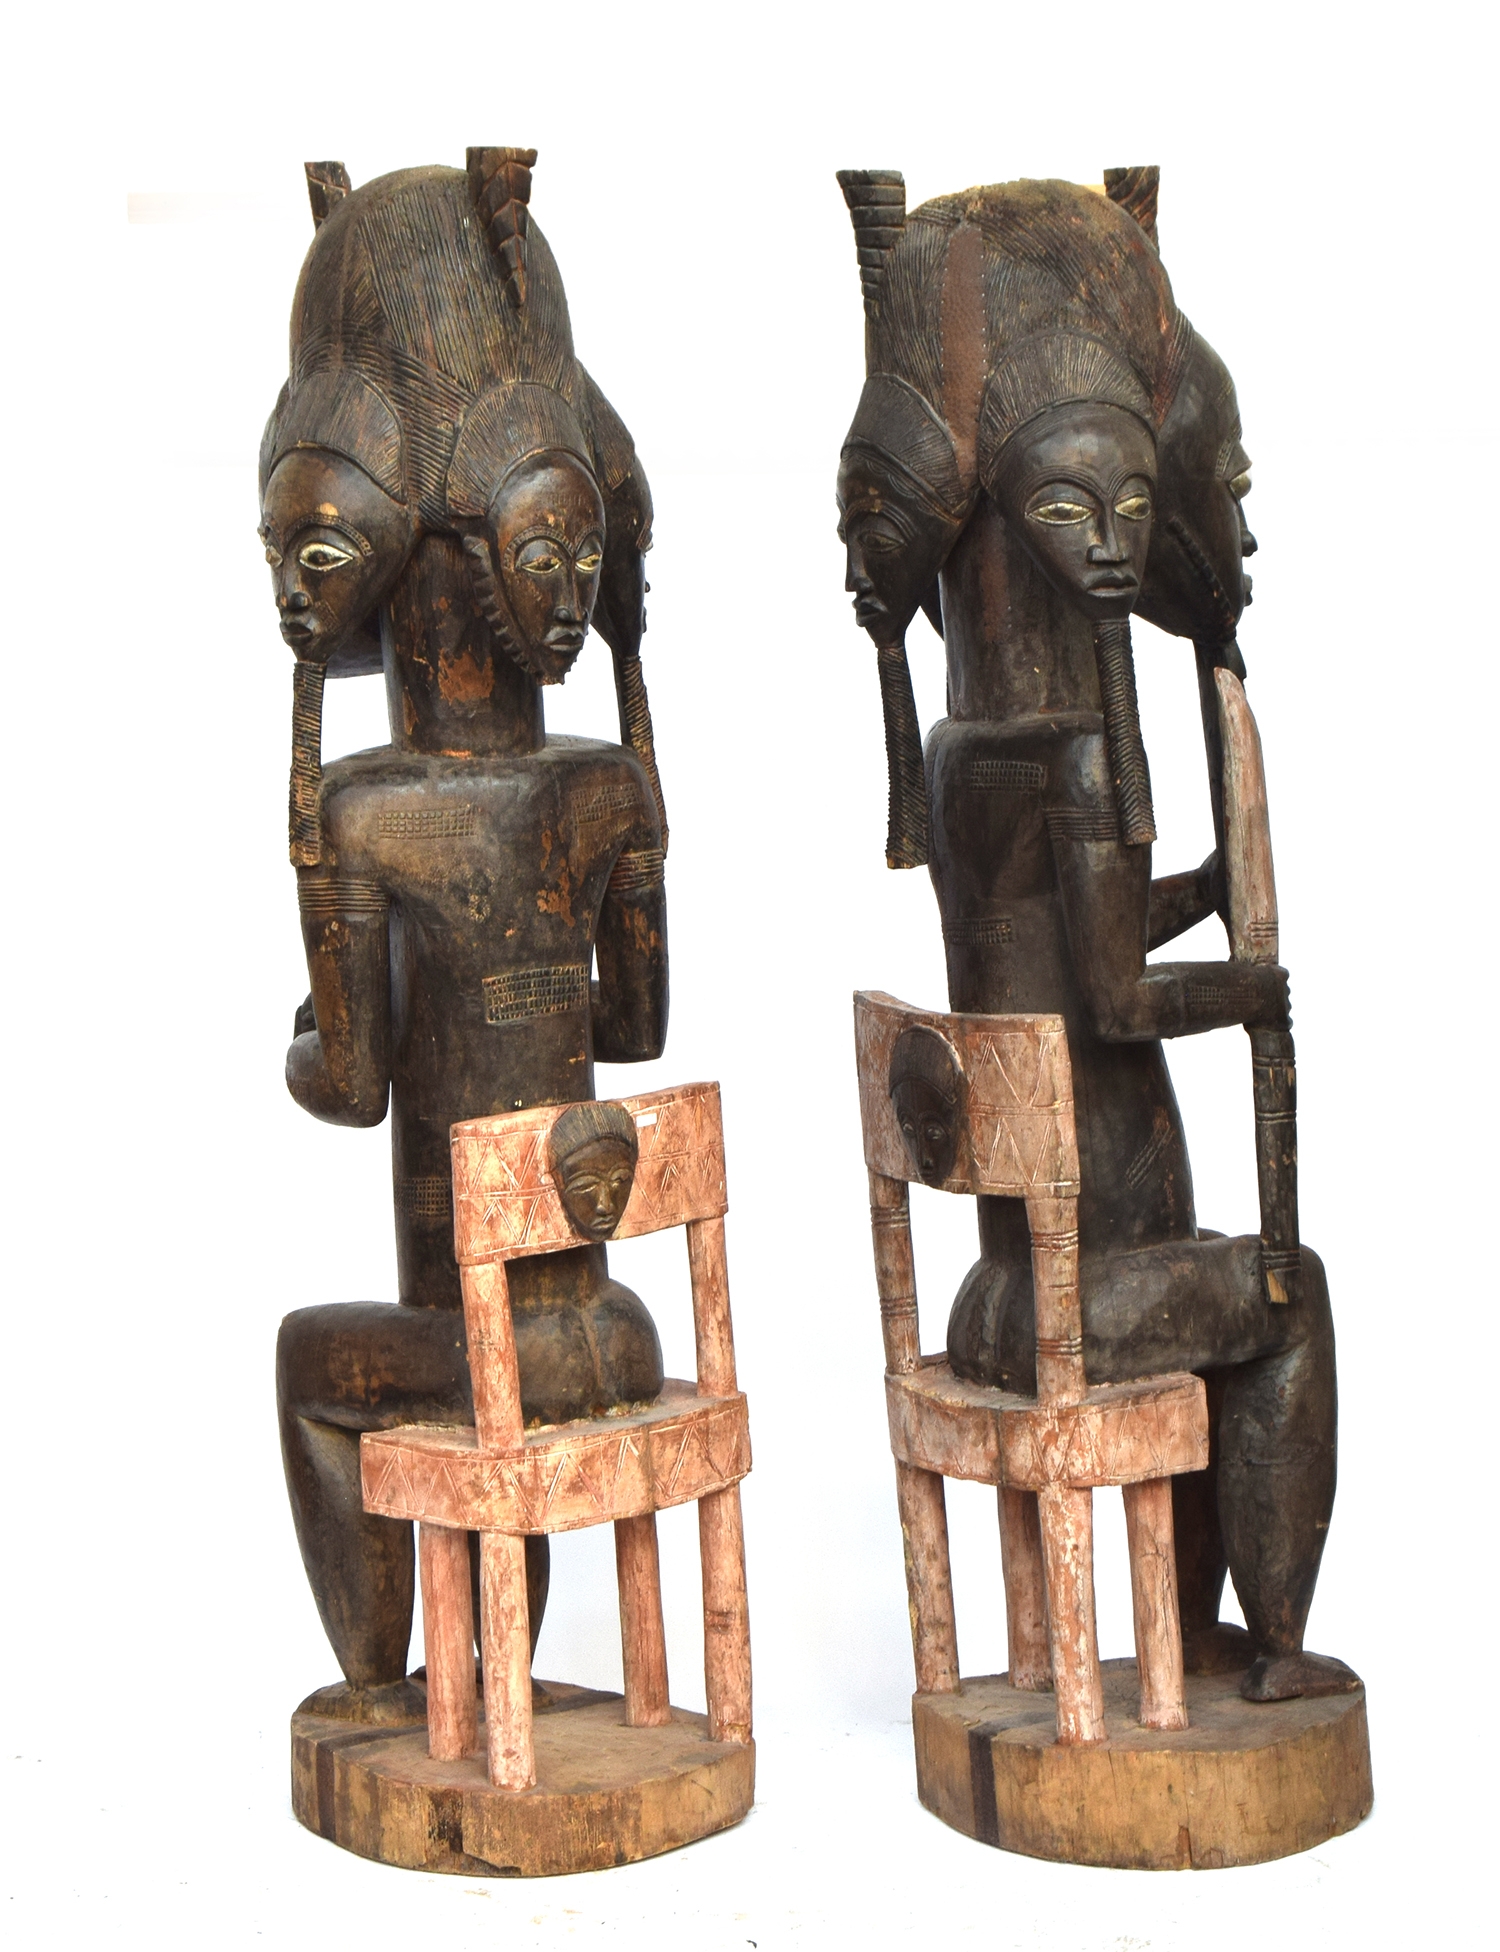 A pair of Senufo seated fertility figures, carved wood, Ivory Coast, 200cm high - Image 2 of 2